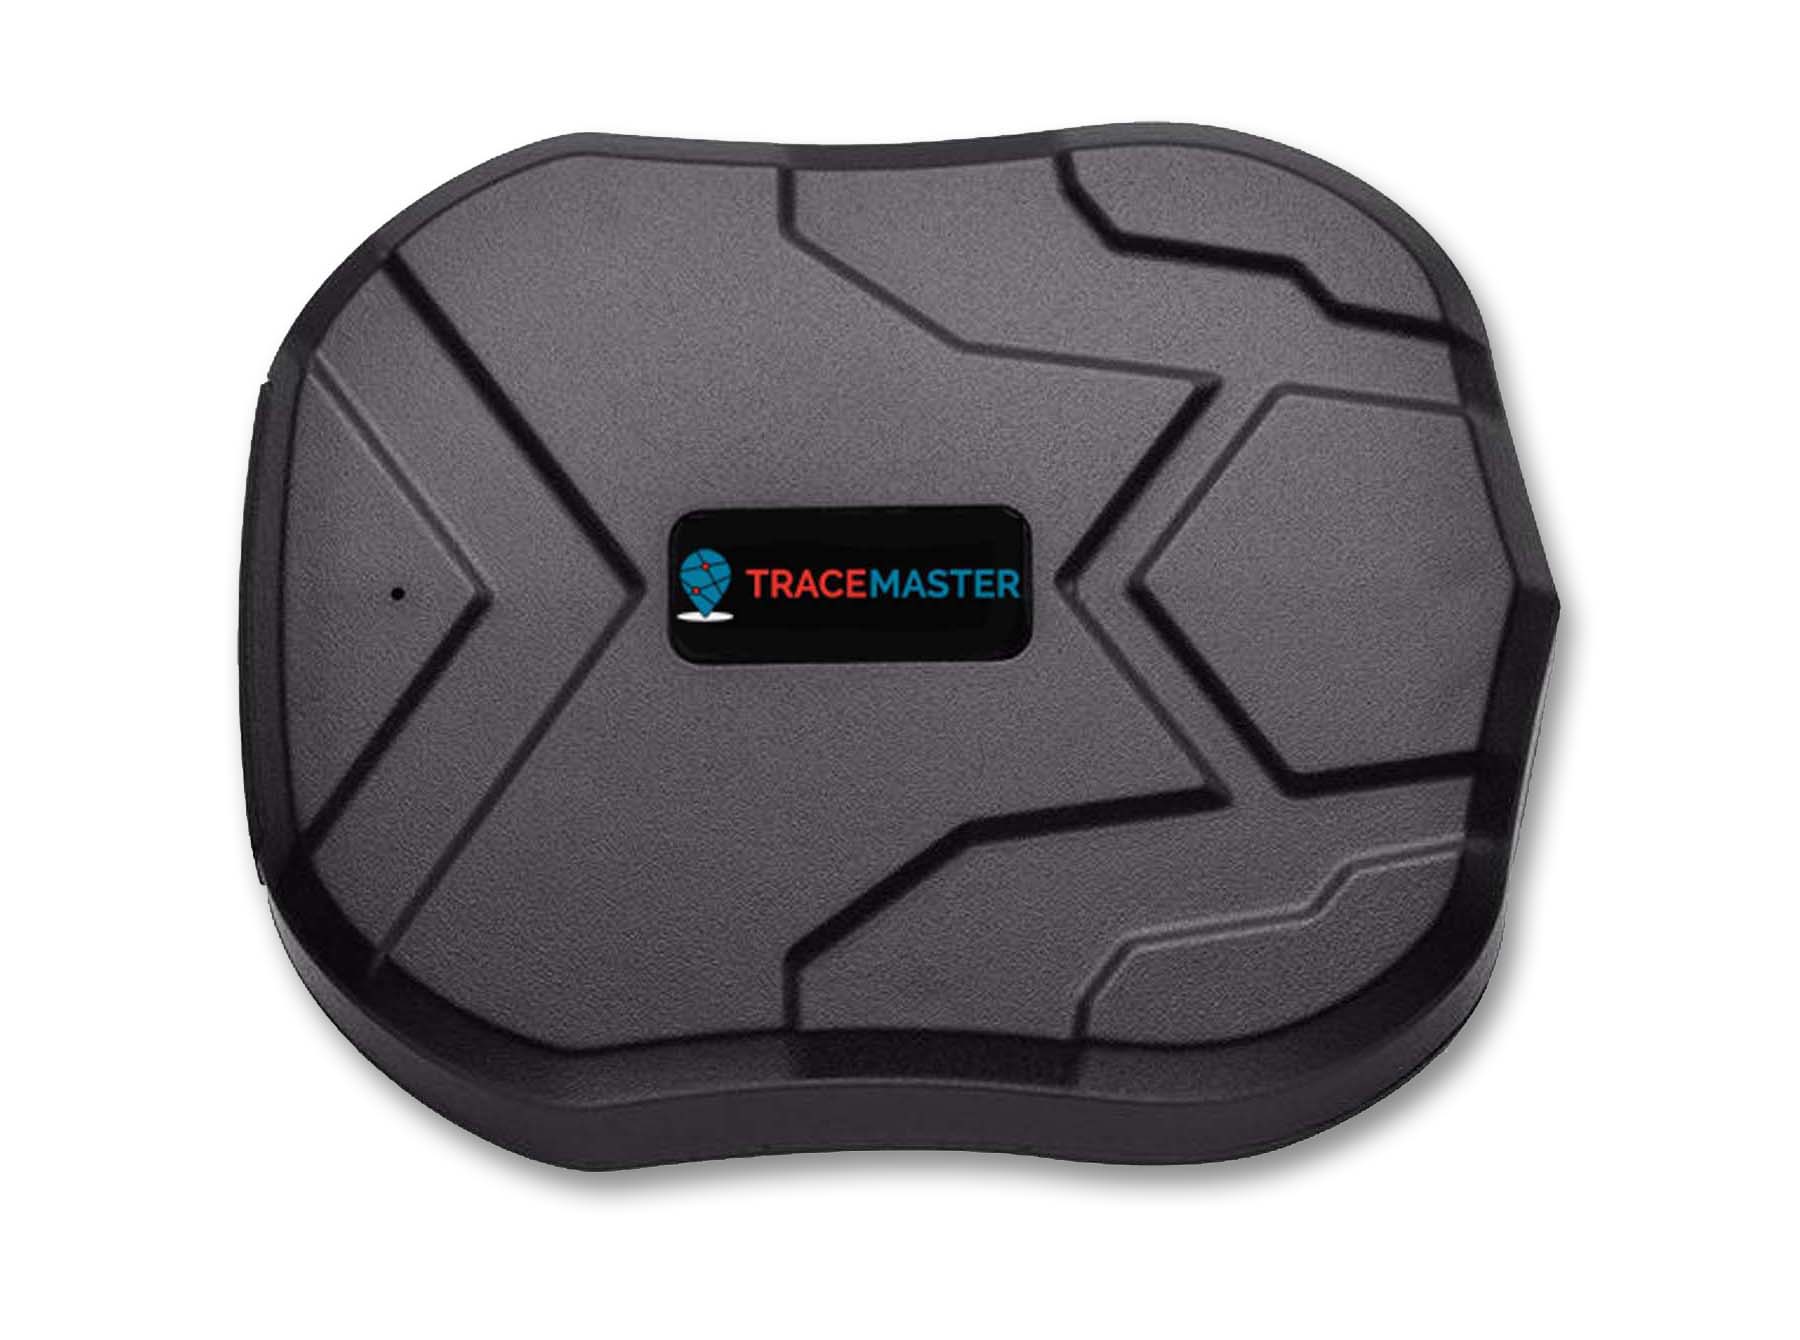 Tracemaster GPS